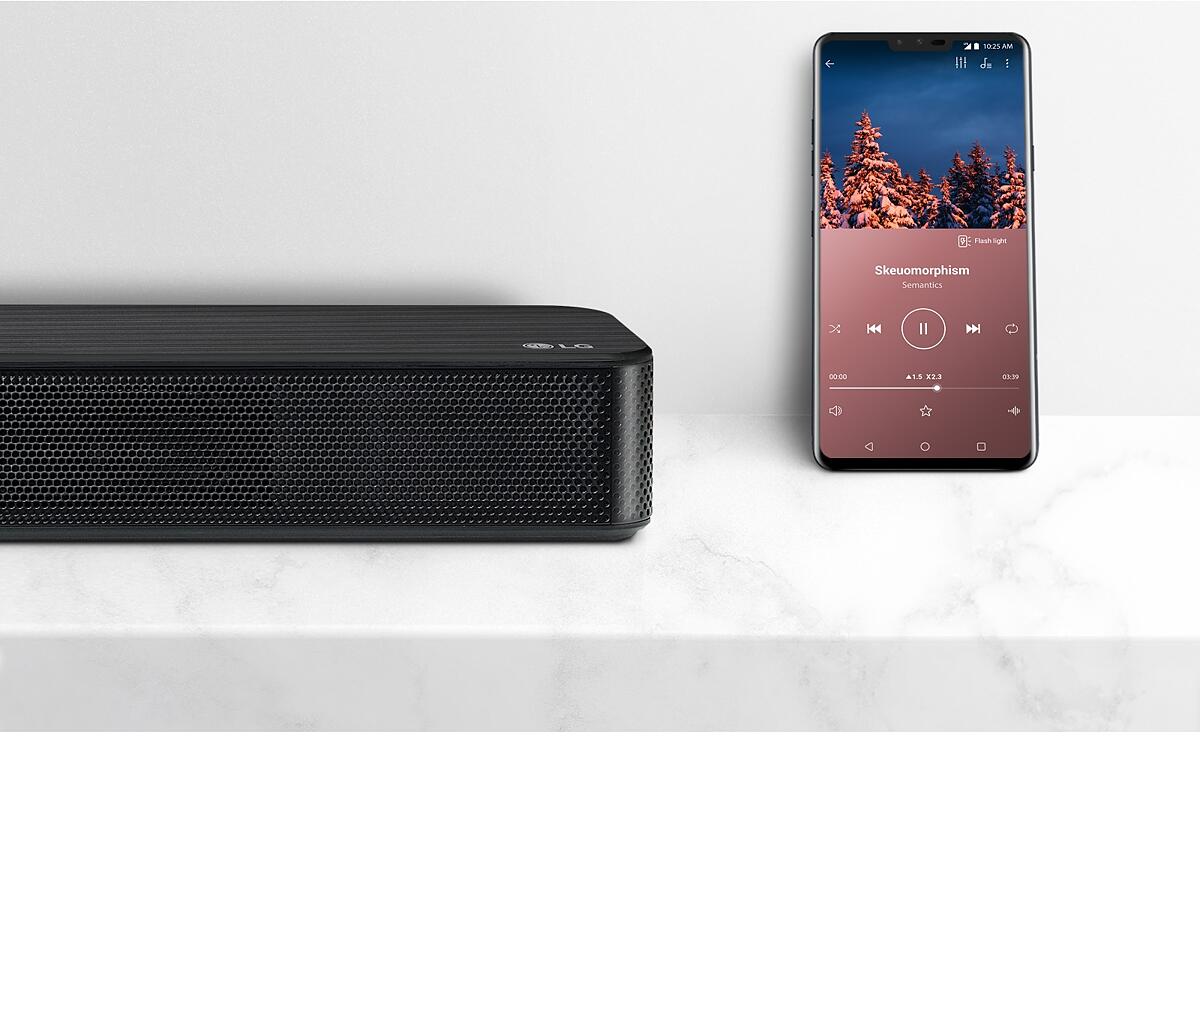 Close-up right side of LG Soundbar next to smartphone. Two devices are on the white shelf.